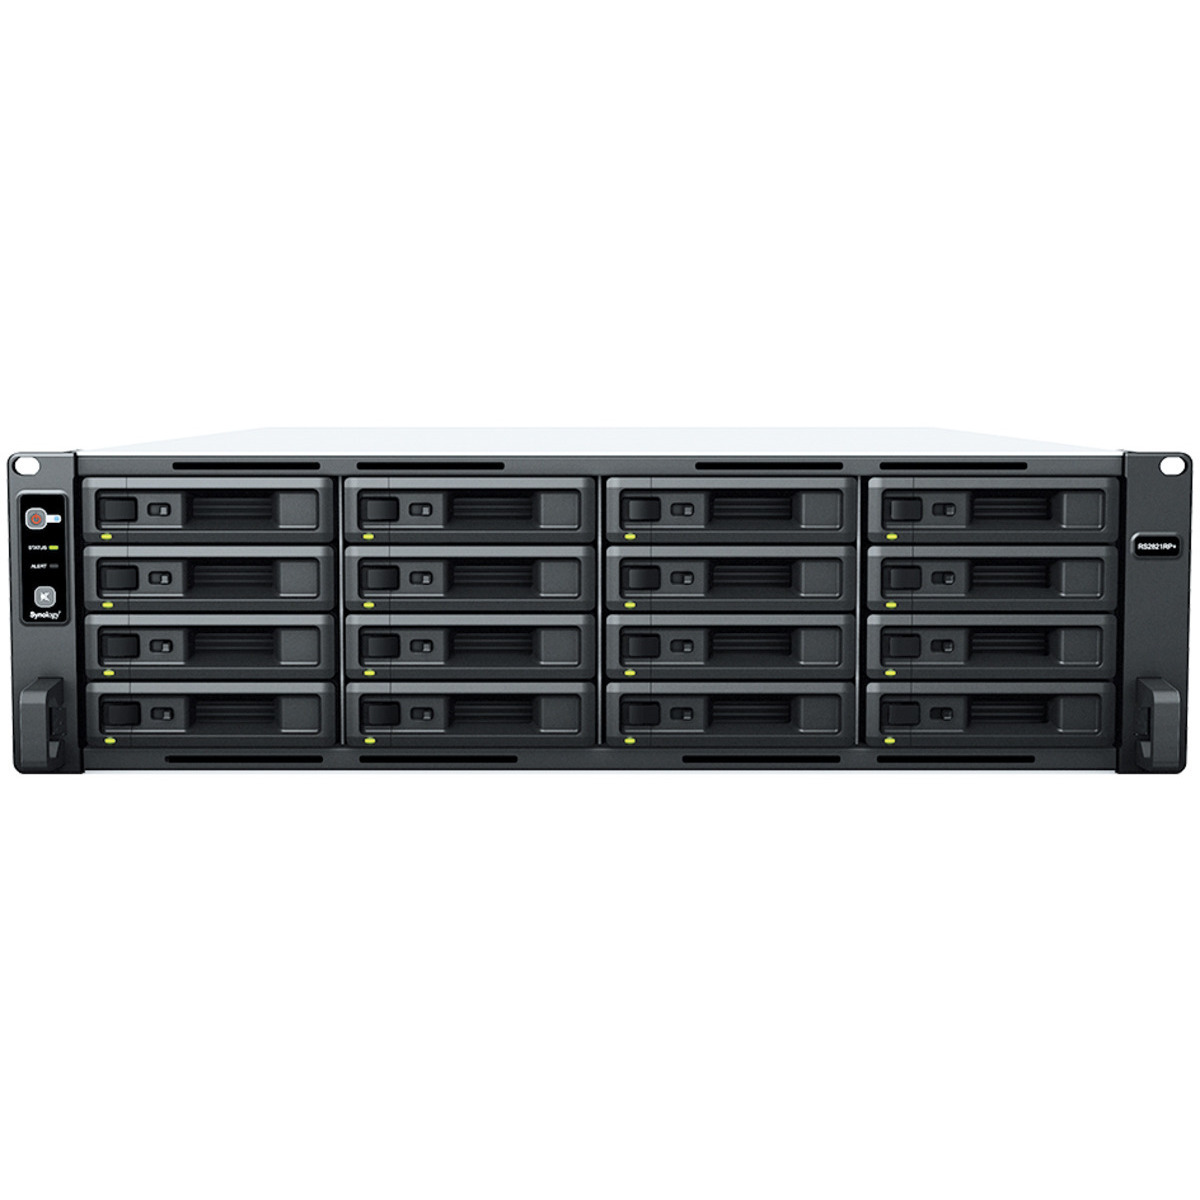 Synology RackStation RS2821RP+ 128tb 16-Bay RackMount Large Business / Enterprise NAS - Network Attached Storage Device 16x8tb Western Digital Ultrastar DC HC320 HUS728T8TALE6L4 3.5 7200rpm SATA 6Gb/s HDD ENTERPRISE Class Drives Installed - Burn-In Tested RackStation RS2821RP+